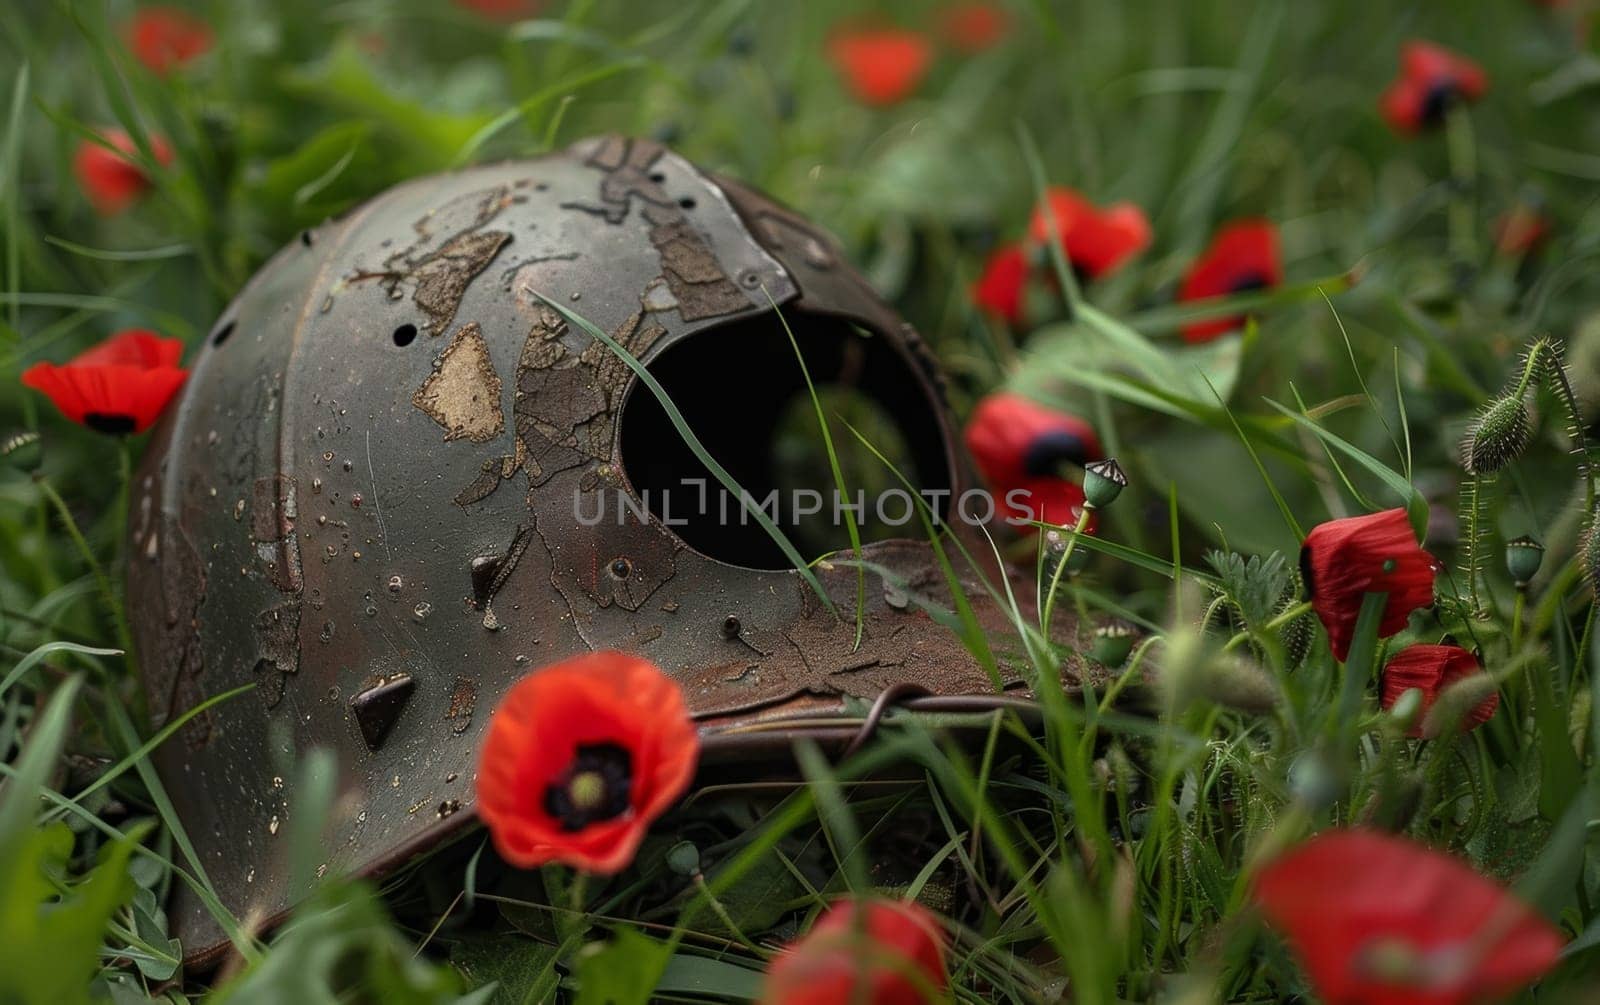 A weathered helmet sits forgotten among blooming poppies, a symbol of past conflicts amidst life's resilience